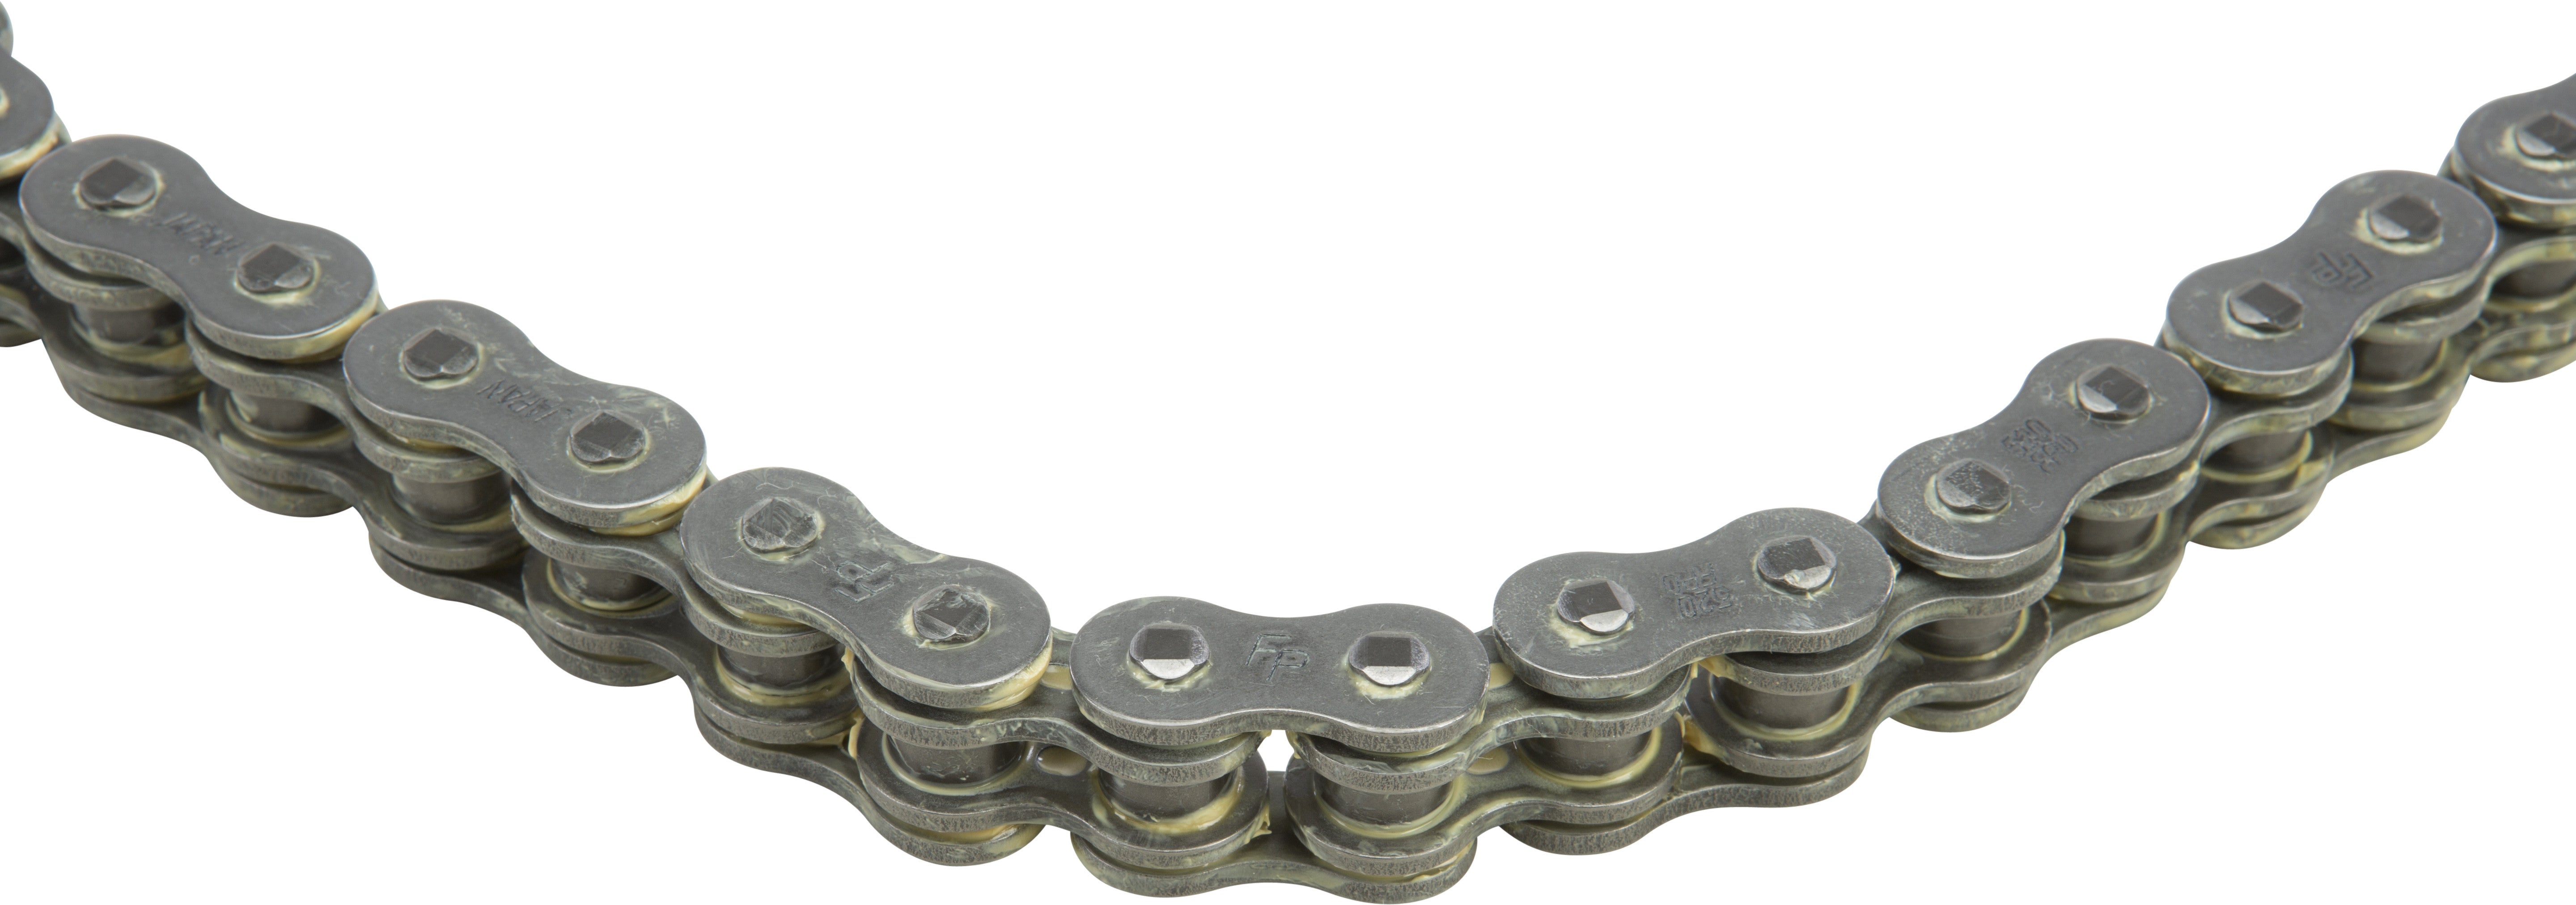 FIRE POWER, FIRE POWER O-RING CHAIN 520X150 520FPO-150